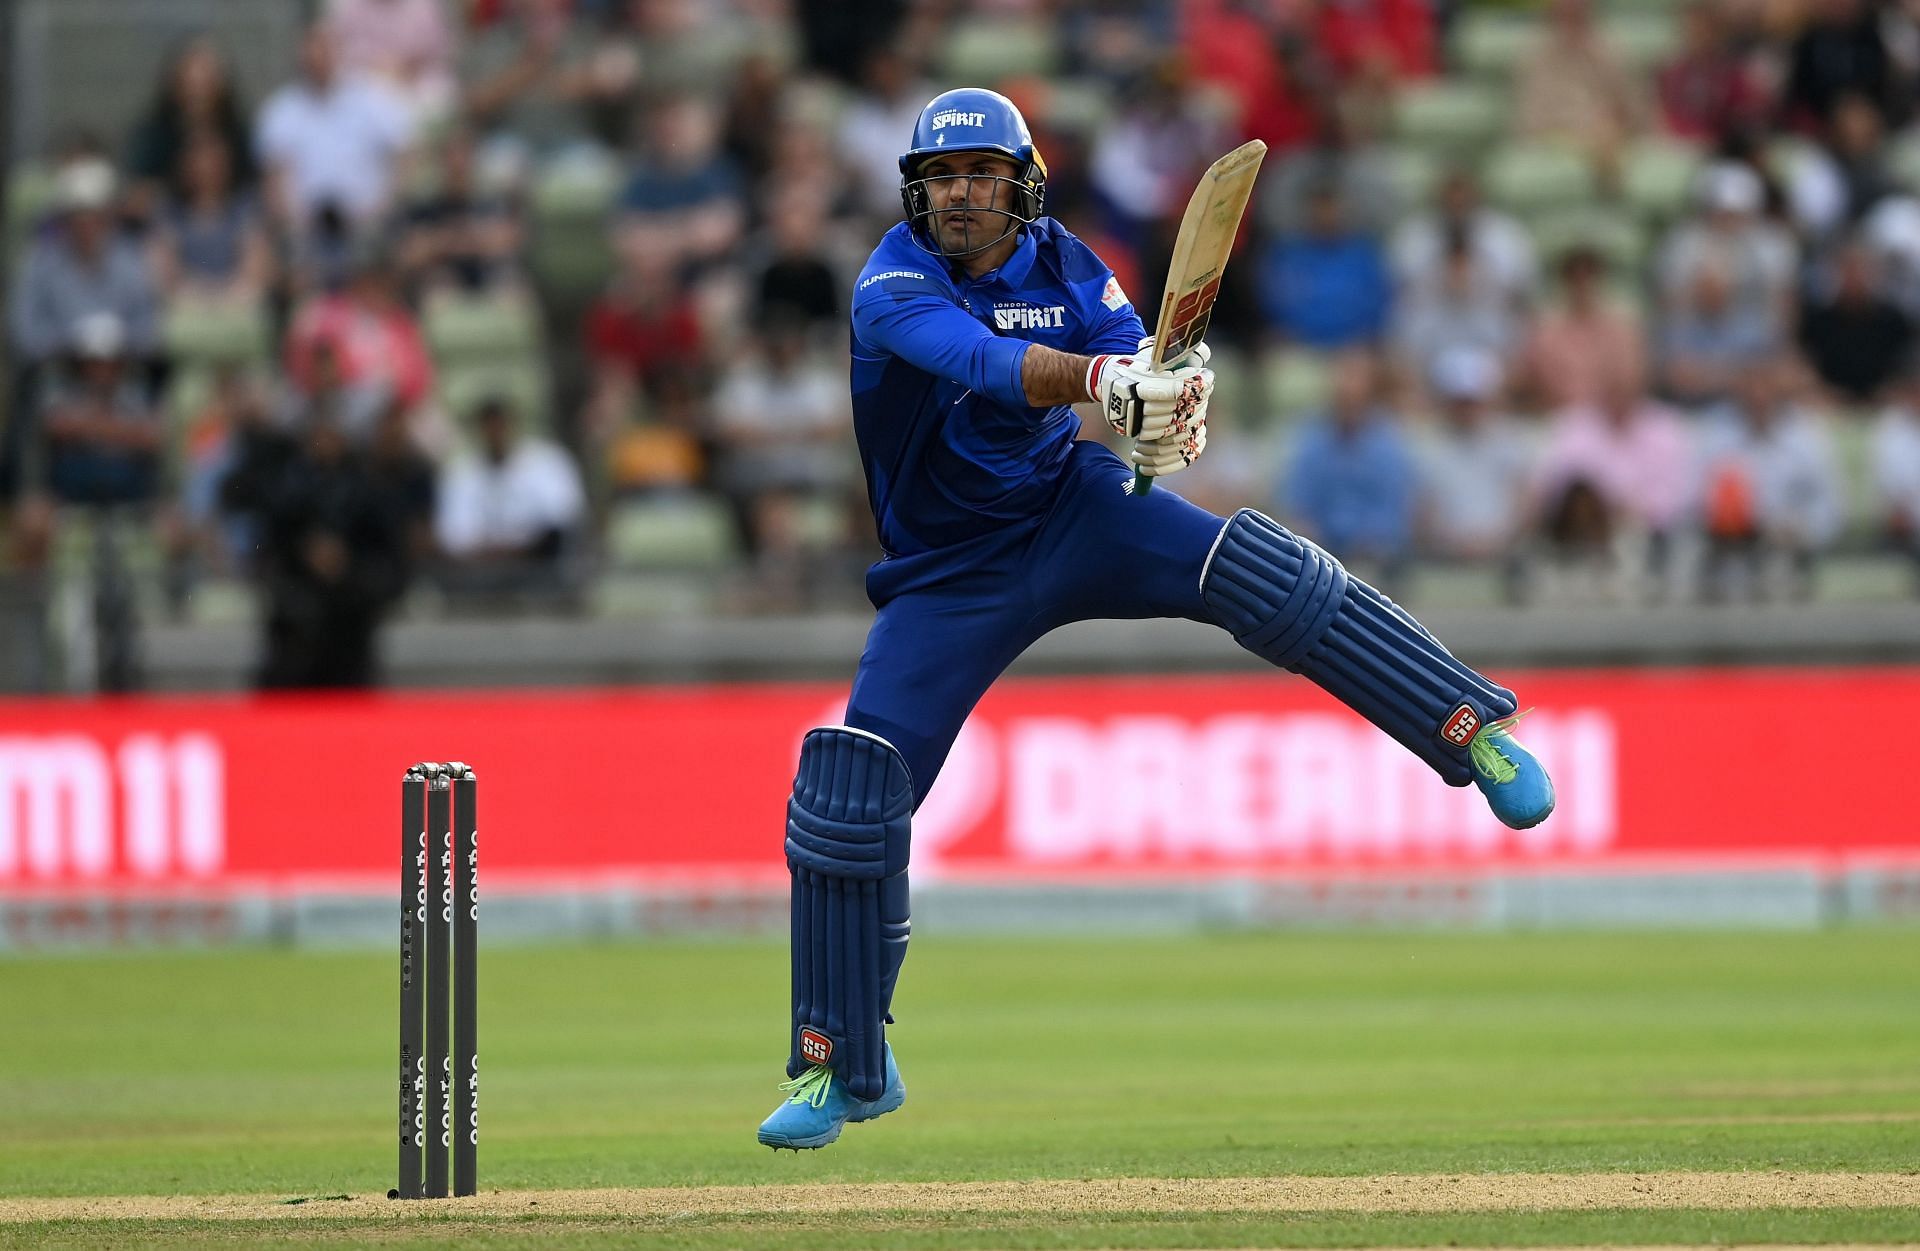 Mohammad Nabi in action at The Hundred.